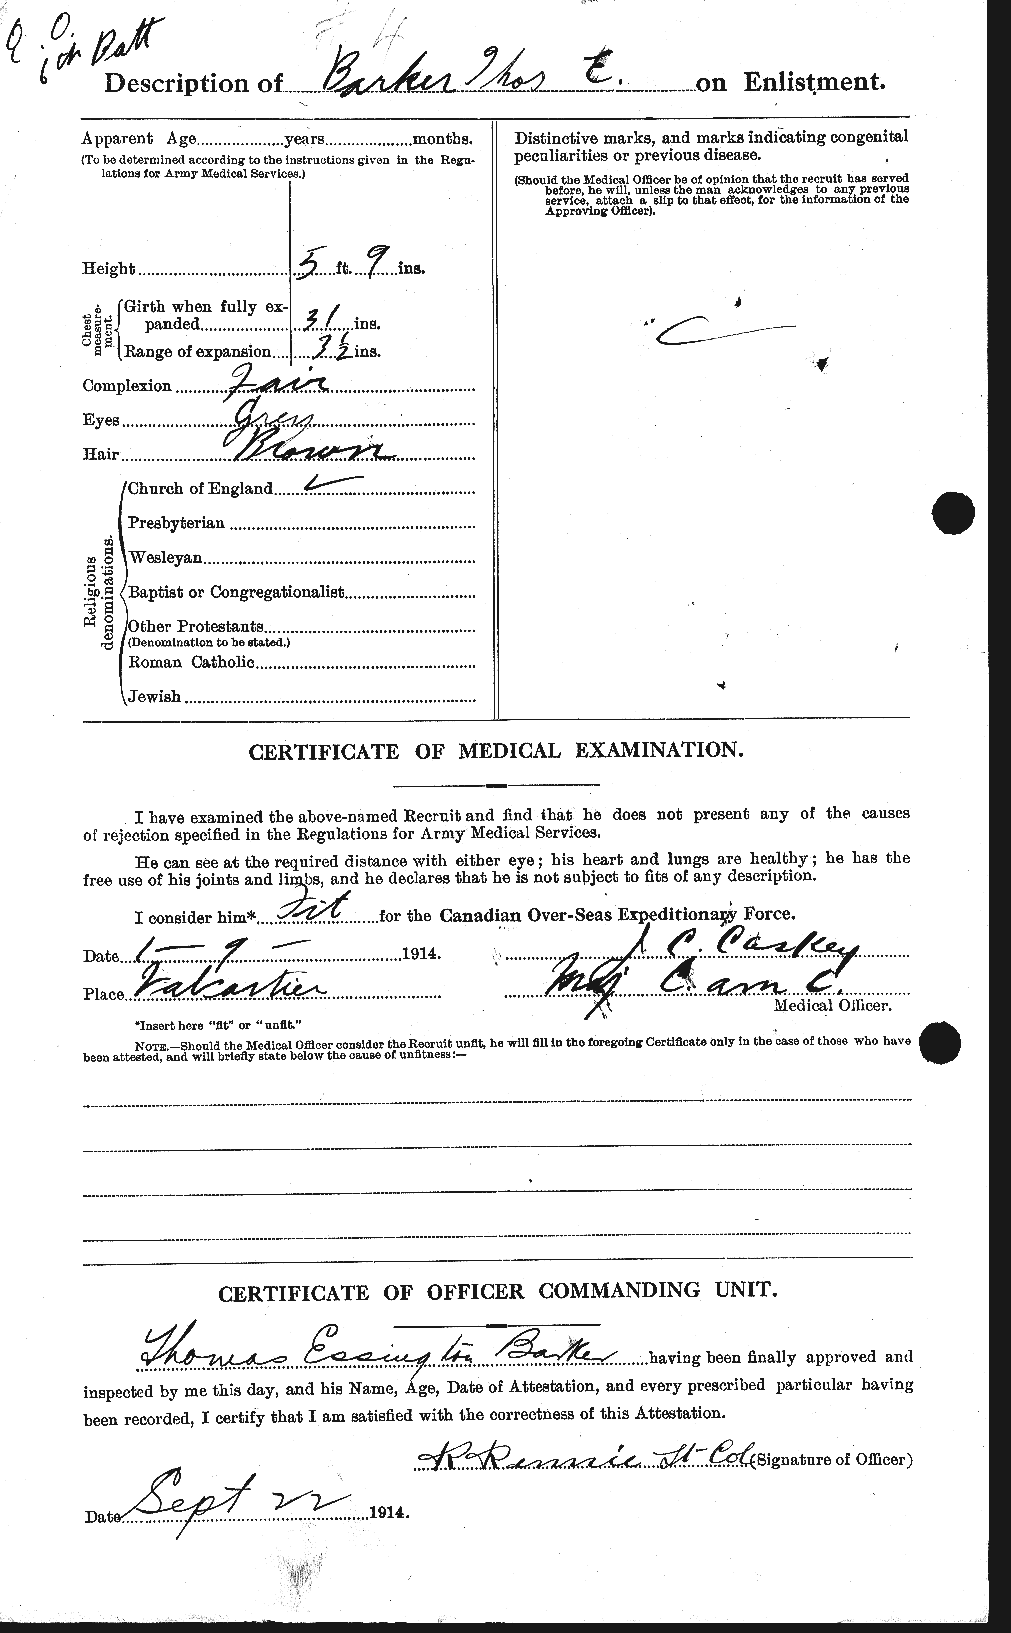 Personnel Records of the First World War - CEF 226933b